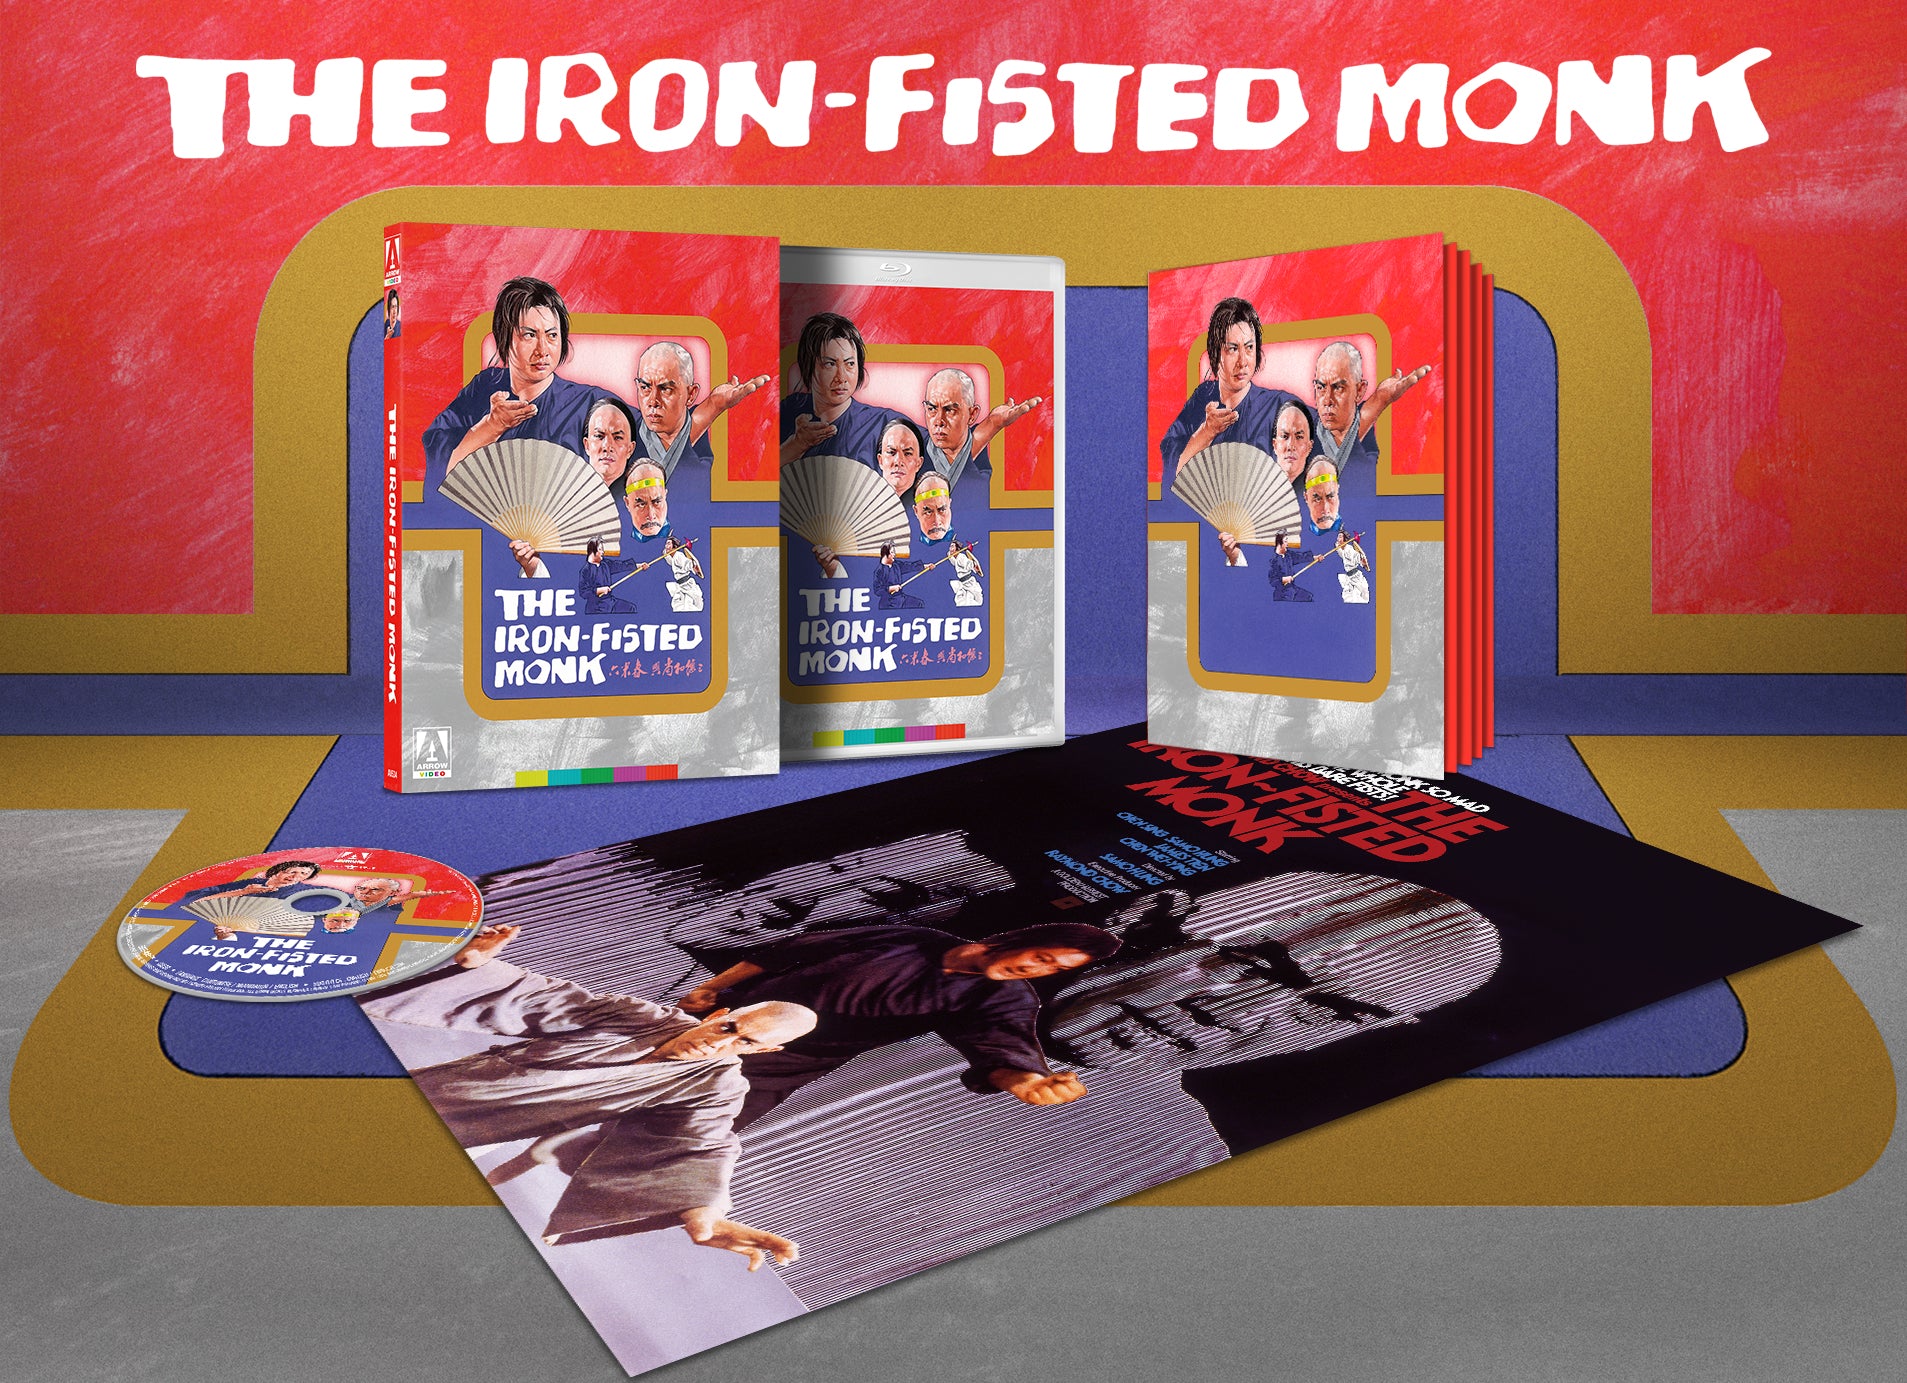 THE IRON FISTED MONK (LIMITED EDITION) BLU-RAY